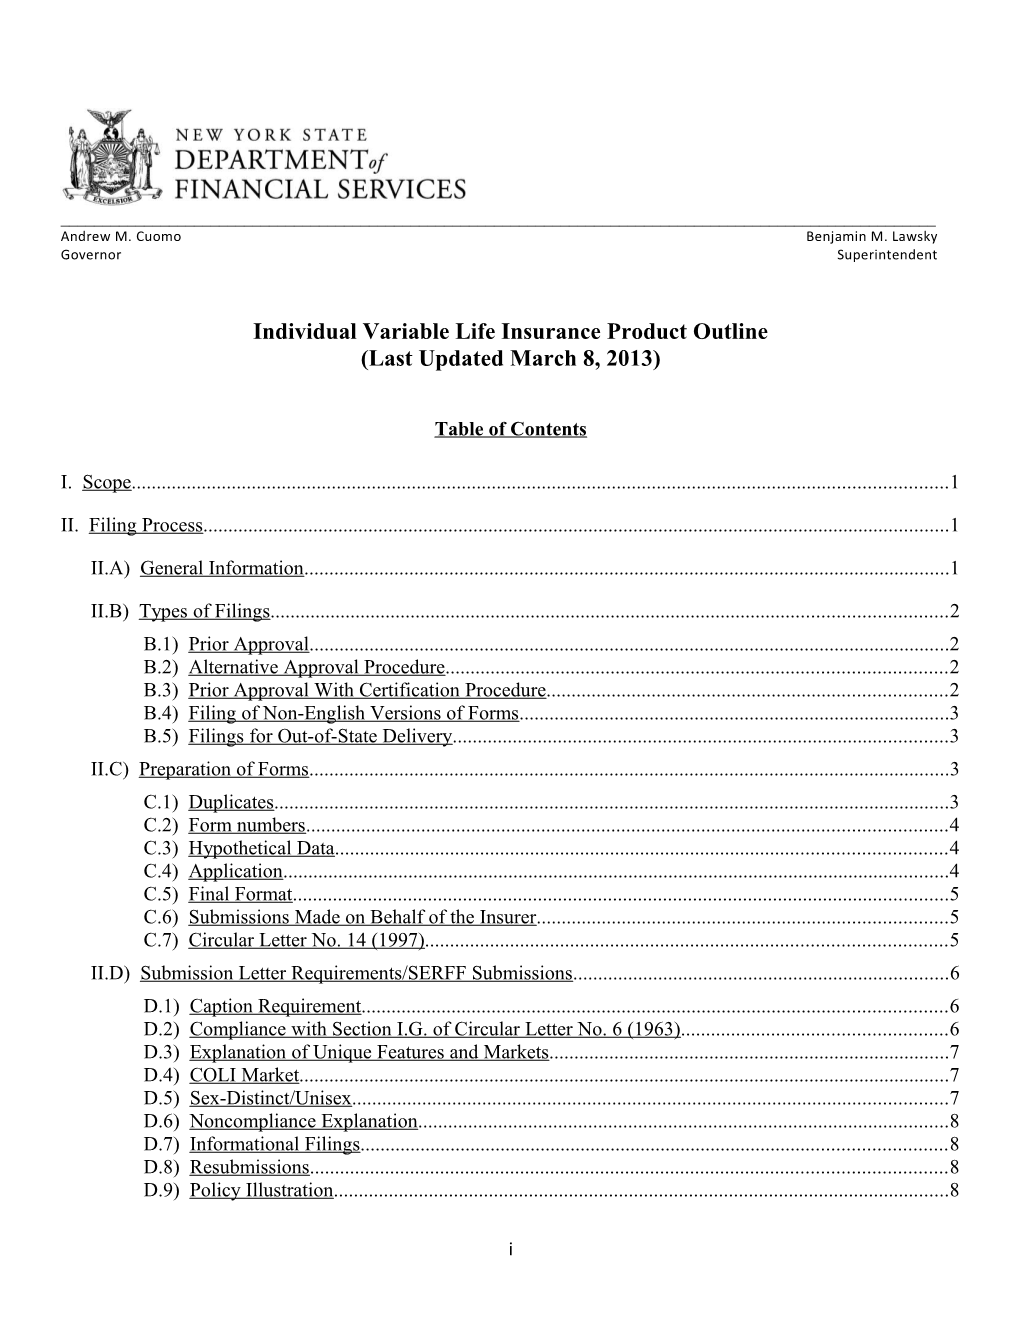 Individual Variable Lifeinsurance Product Outline